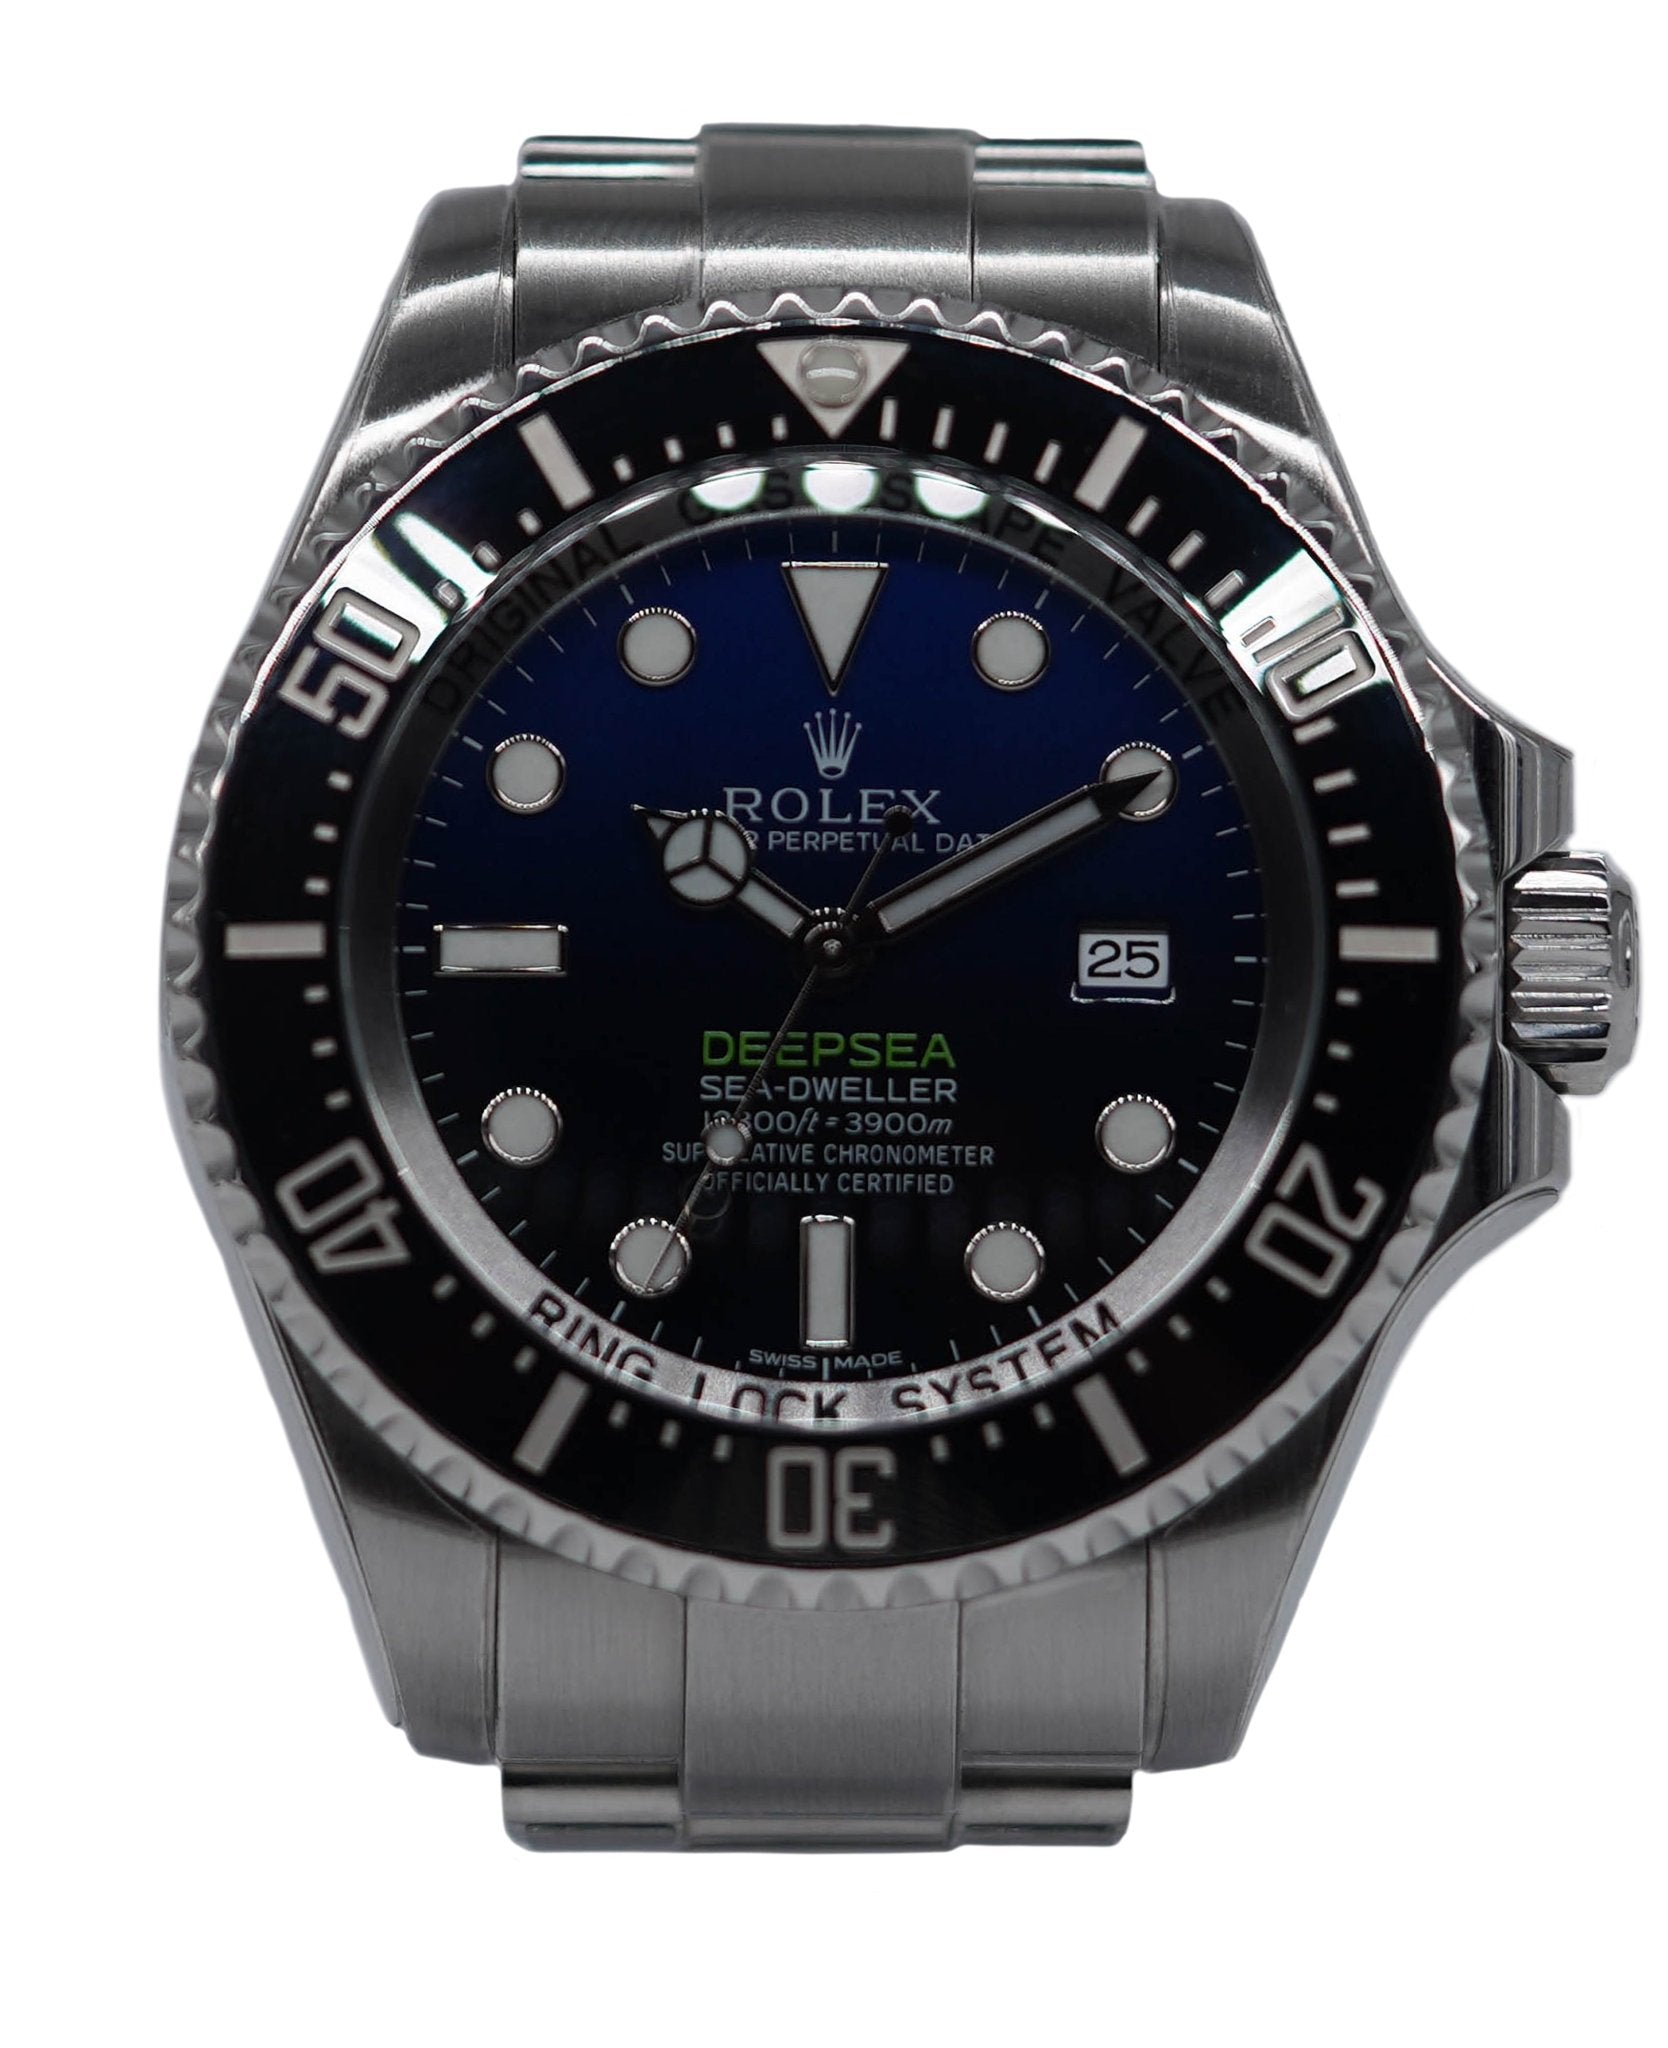 Rolex Deepsea Sea Dweller 12600 Watch Protection Kit - The Watch Protect Company